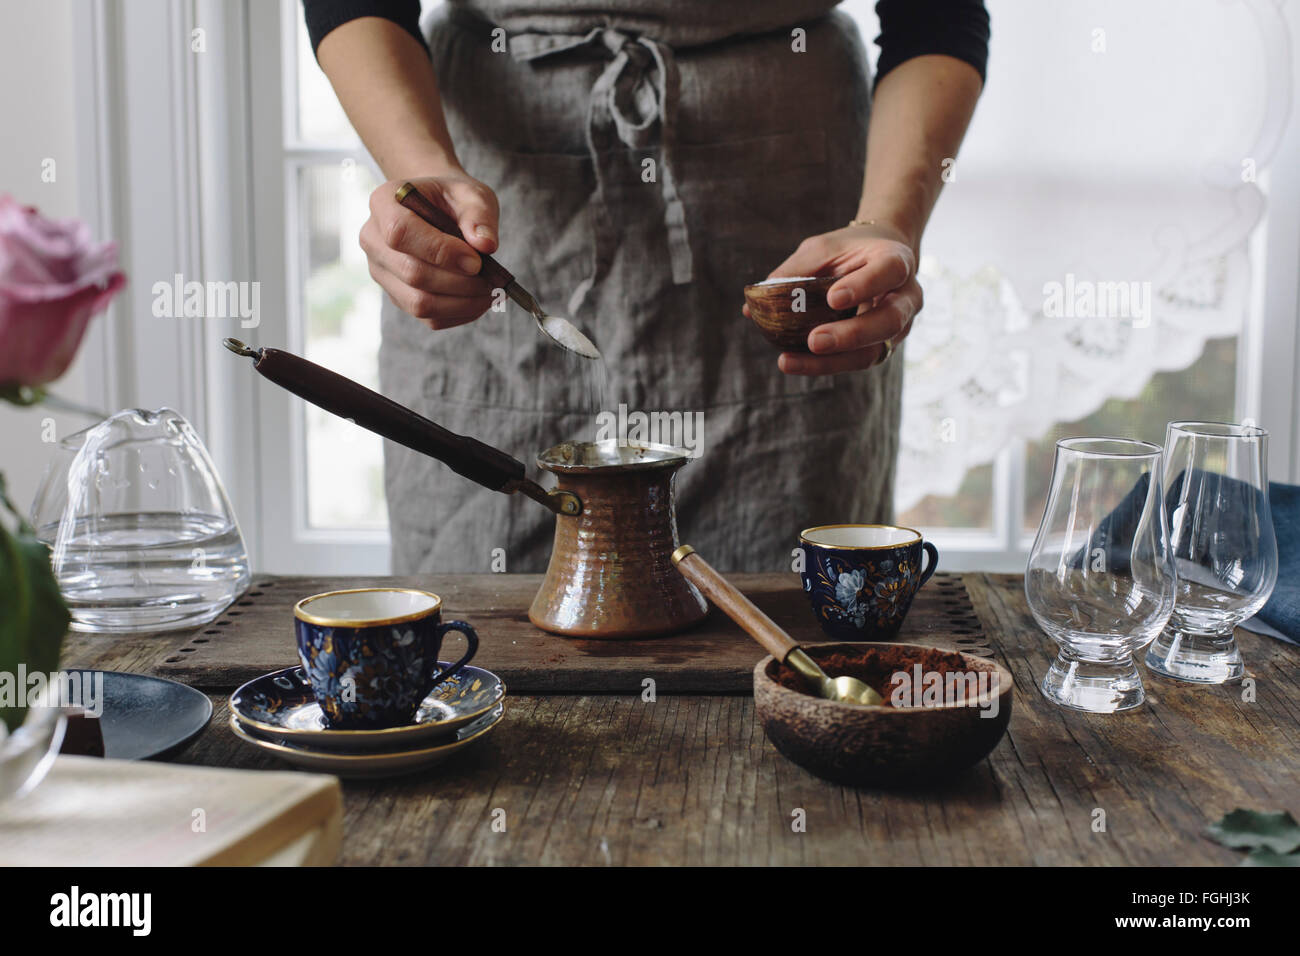 A woman is placing sugar in a small pot to make Turkish Coffee. Stock Photo